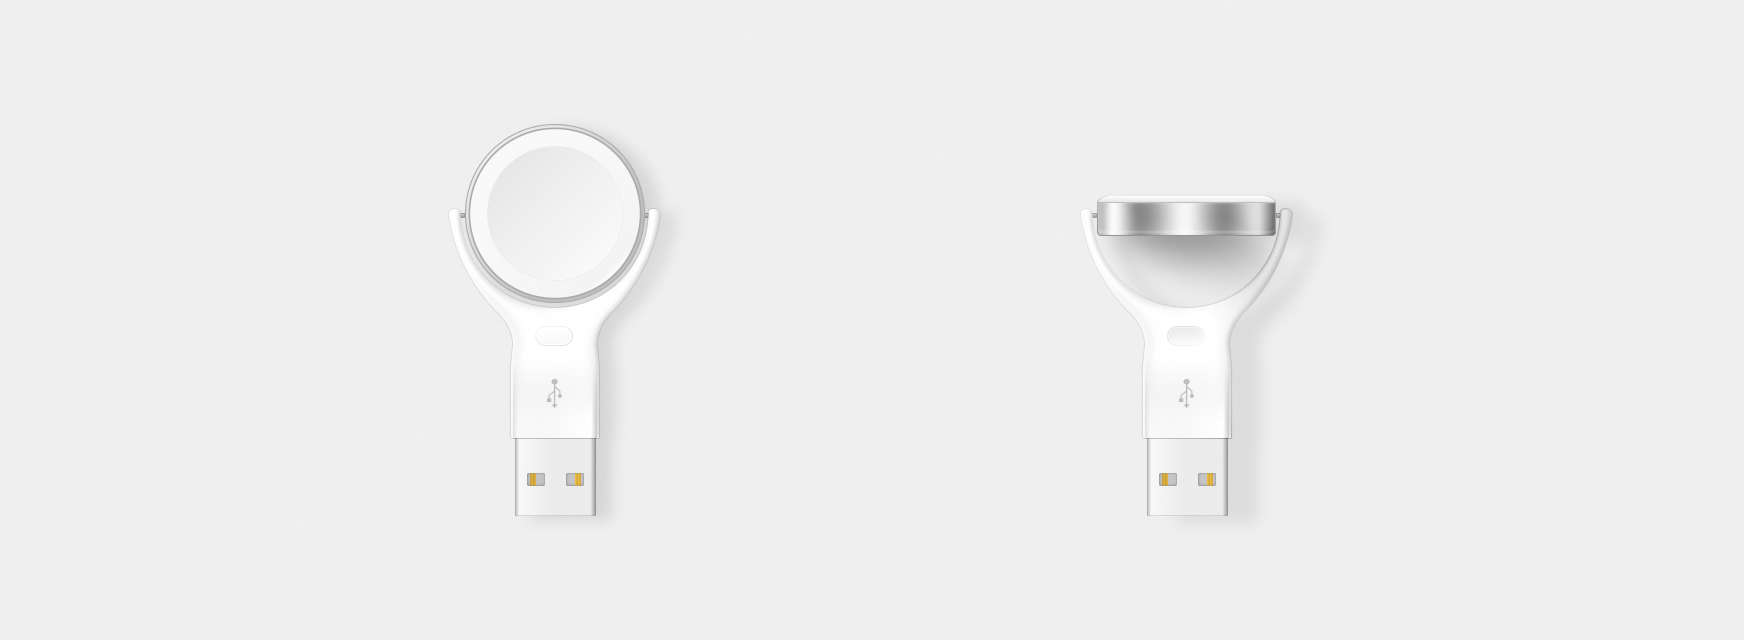 Apple Watch charger concept by InnovationBox